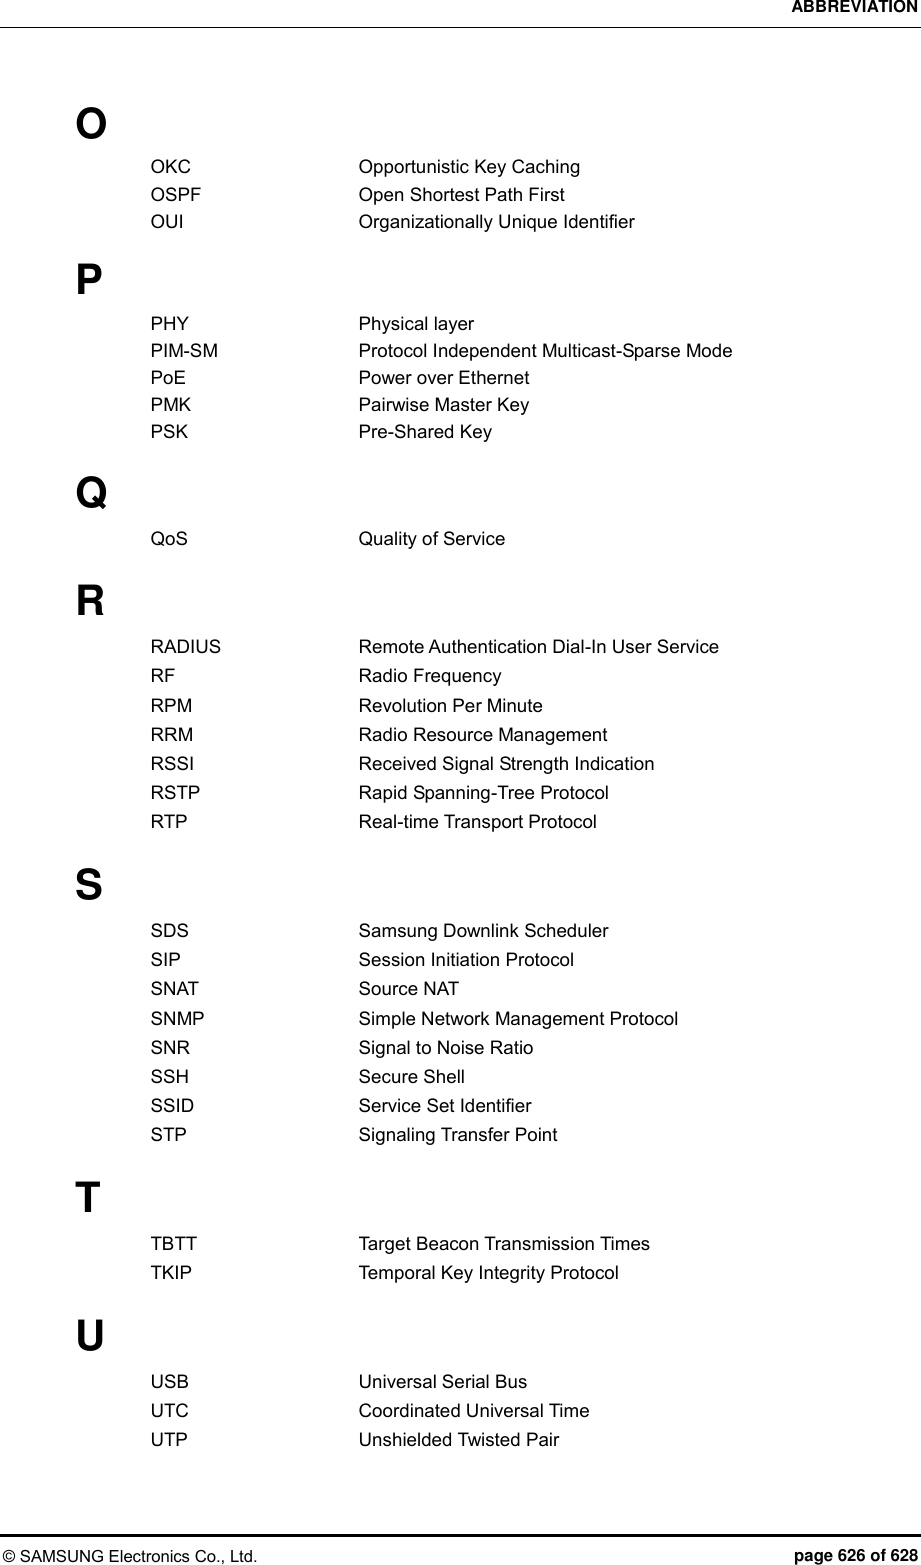 ABBREVIATION © SAMSUNG Electronics Co., Ltd.  page 626 of 628 O OKC    Opportunistic Key Caching OSPF    Open Shortest Path First OUI    Organizationally Unique Identifier  P PHY    Physical layer PIM-SM    Protocol Independent Multicast-Sparse Mode PoE    Power over Ethernet PMK    Pairwise Master Key PSK   Pre-Shared Key  Q QoS    Quality of Service  R RADIUS    Remote Authentication Dial-In User Service RF    Radio Frequency RPM    Revolution Per Minute RRM    Radio Resource Management RSSI    Received Signal Strength Indication RSTP    Rapid Spanning-Tree Protocol RTP    Real-time Transport Protocol  S SDS    Samsung Downlink Scheduler SIP    Session Initiation Protocol SNAT    Source NAT SNMP    Simple Network Management Protocol SNR    Signal to Noise Ratio SSH    Secure Shell SSID    Service Set Identifier STP    Signaling Transfer Point  T TBTT    Target Beacon Transmission Times TKIP    Temporal Key Integrity Protocol  U USB    Universal Serial Bus UTC    Coordinated Universal Time UTP    Unshielded Twisted Pair  